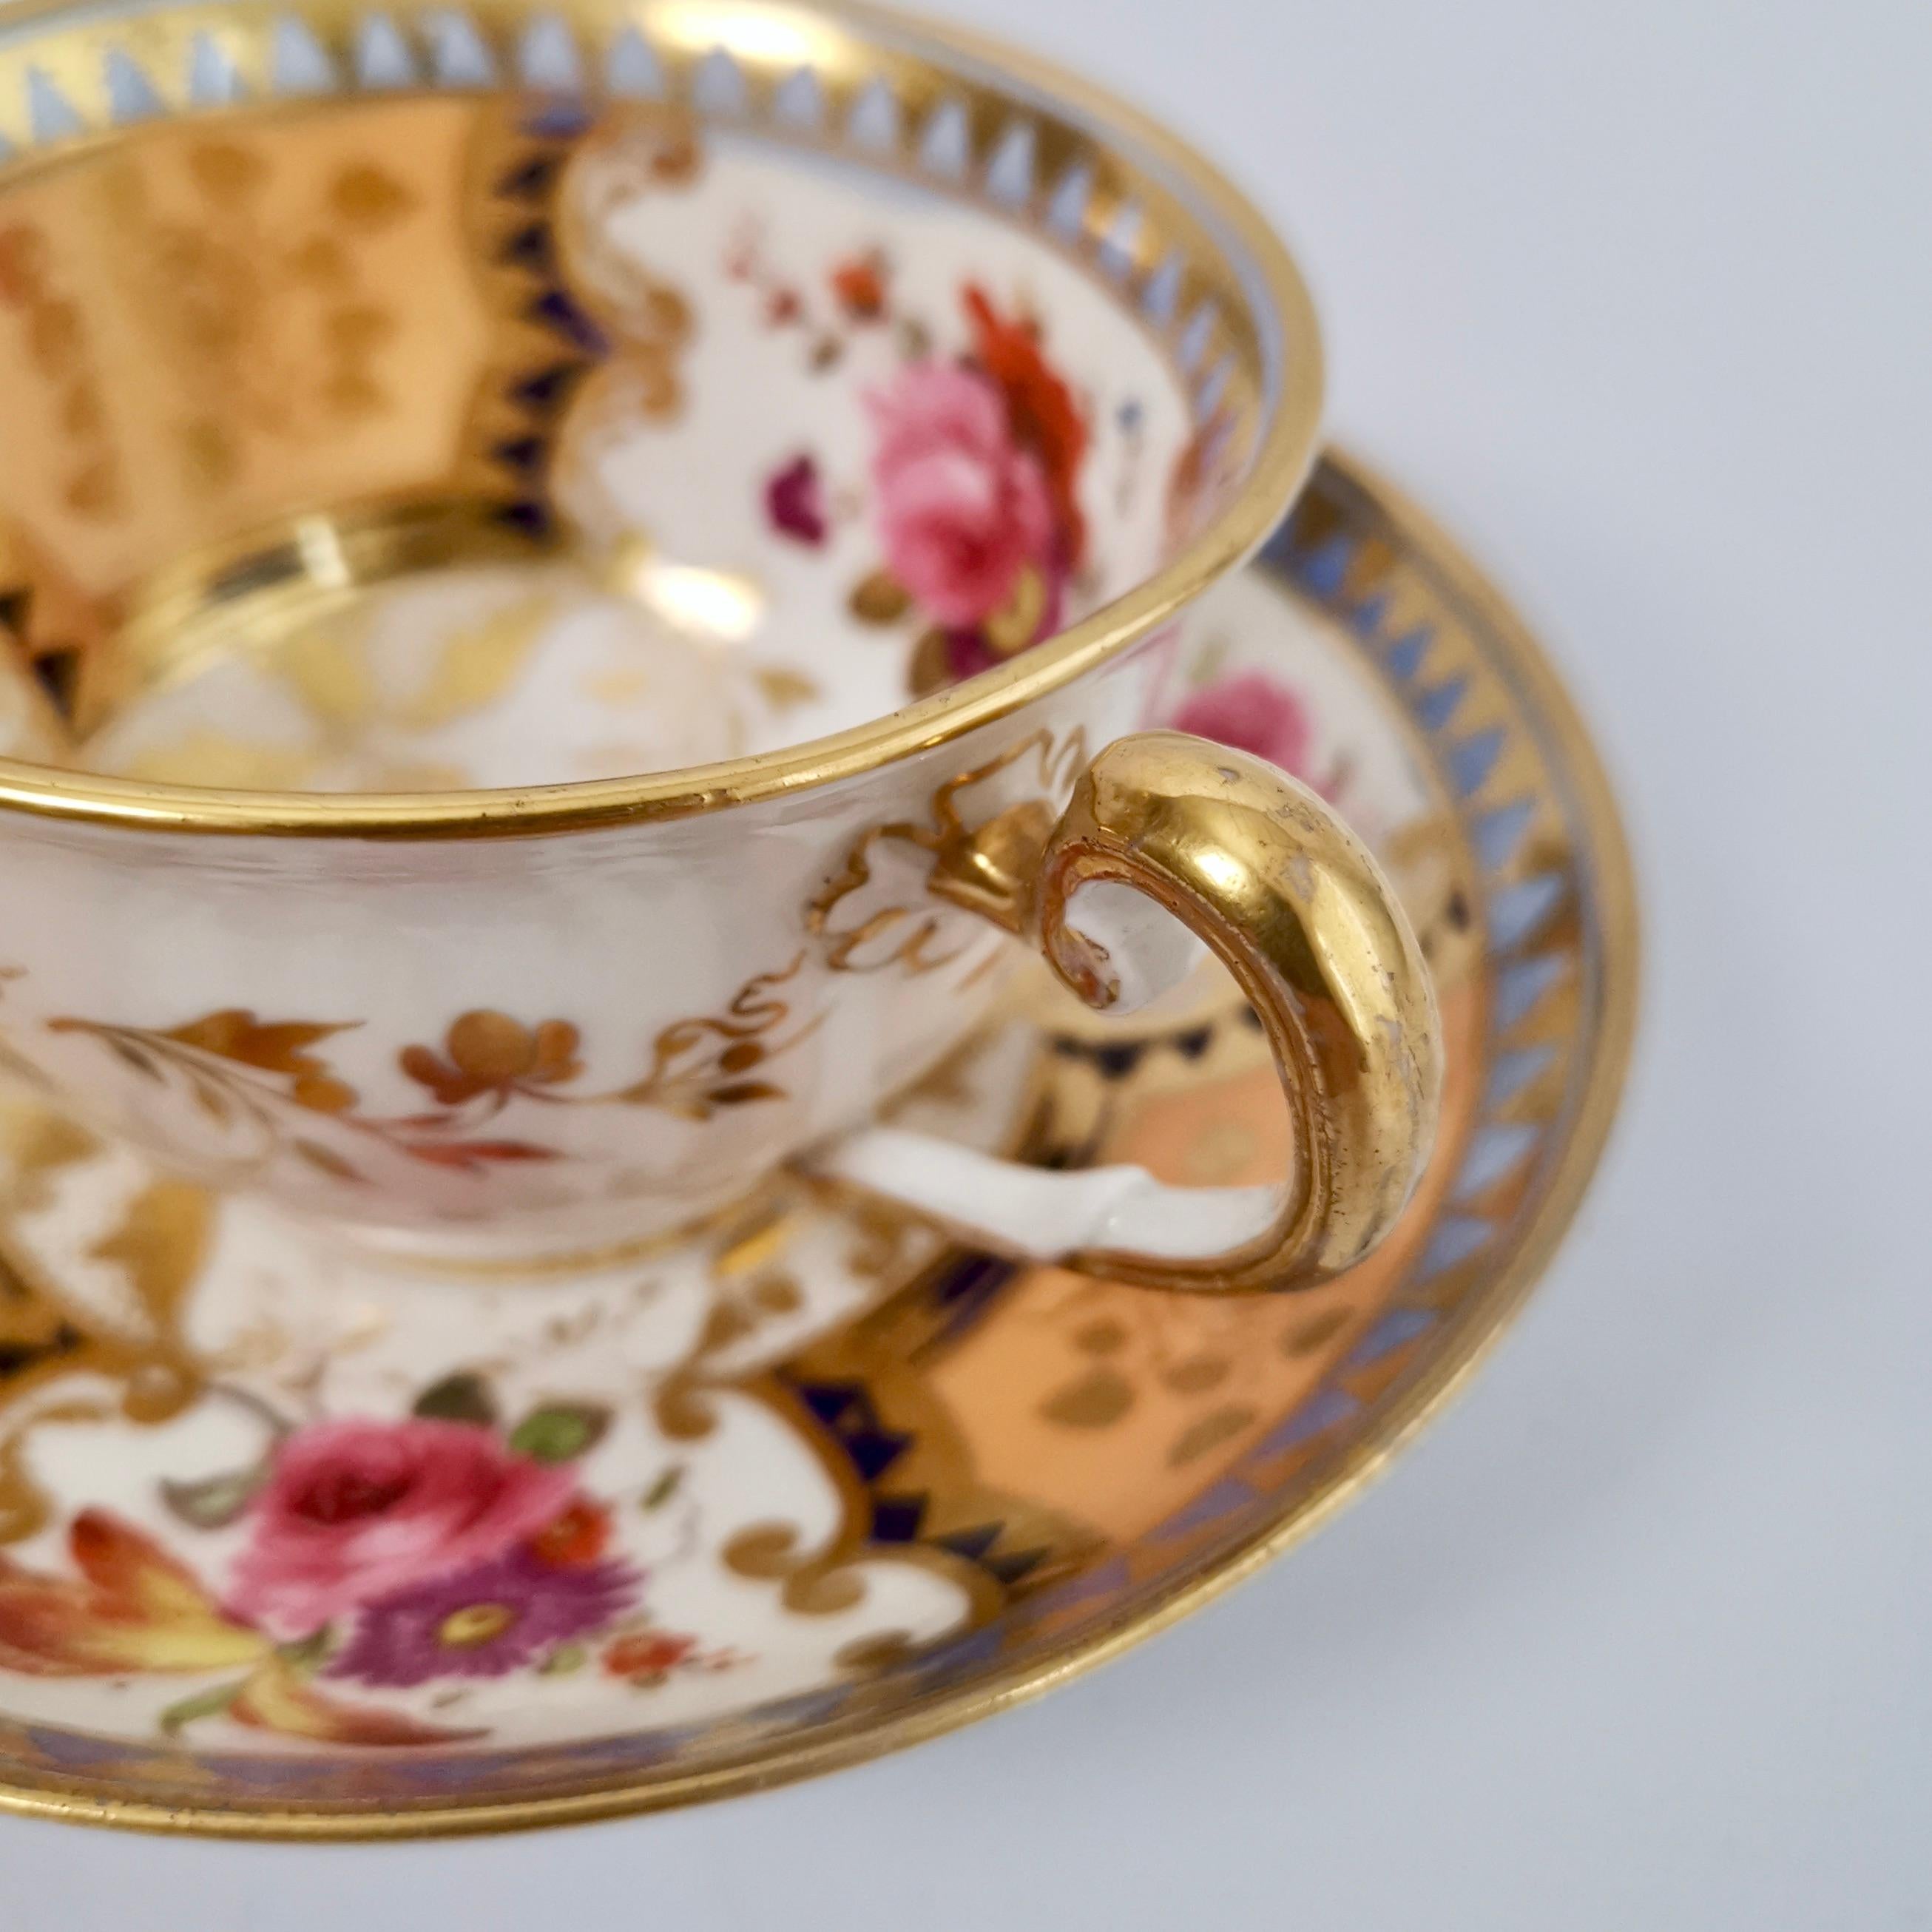 Early 19th Century Ridgway Porcelain Teacup, Apricot, Periwinkle and Flowers, Regency circa 1820